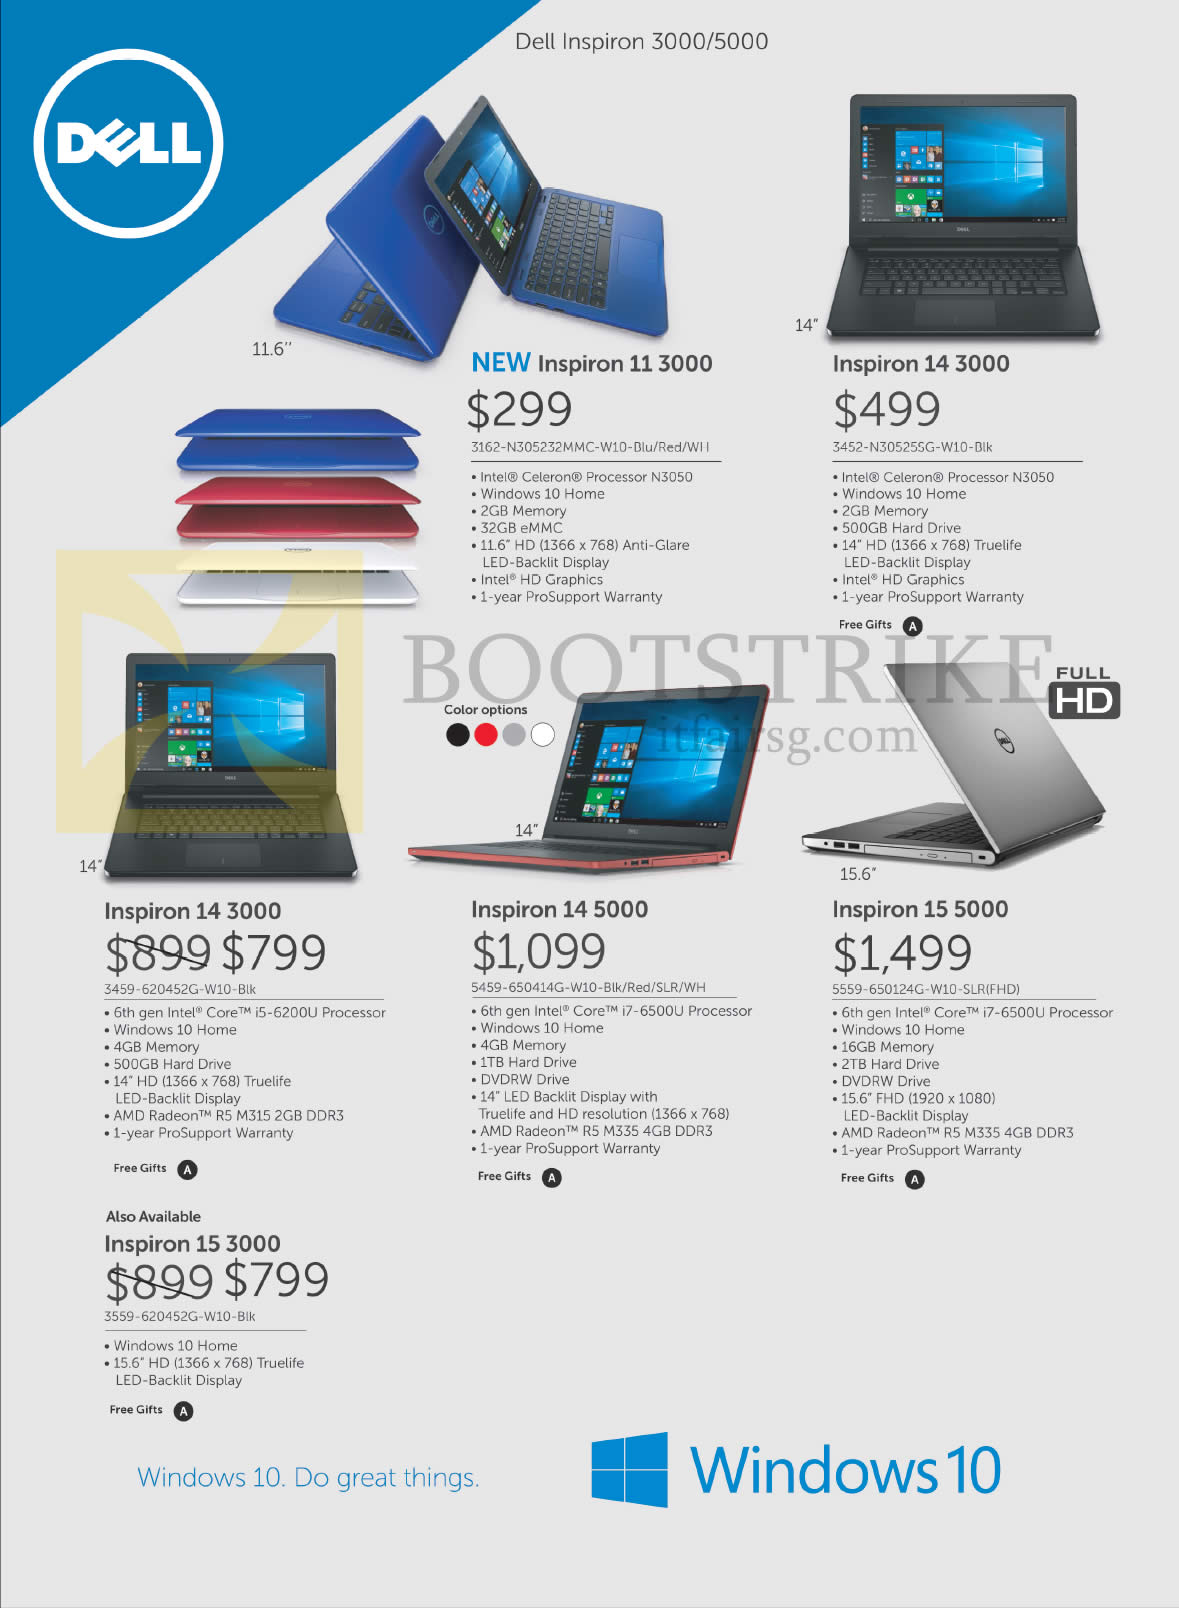 PC SHOW 2016 price list image brochure of Dell Notebooks Inspiron 11 3000, 14 3000, 14 5000, 15 5000, 15 3000